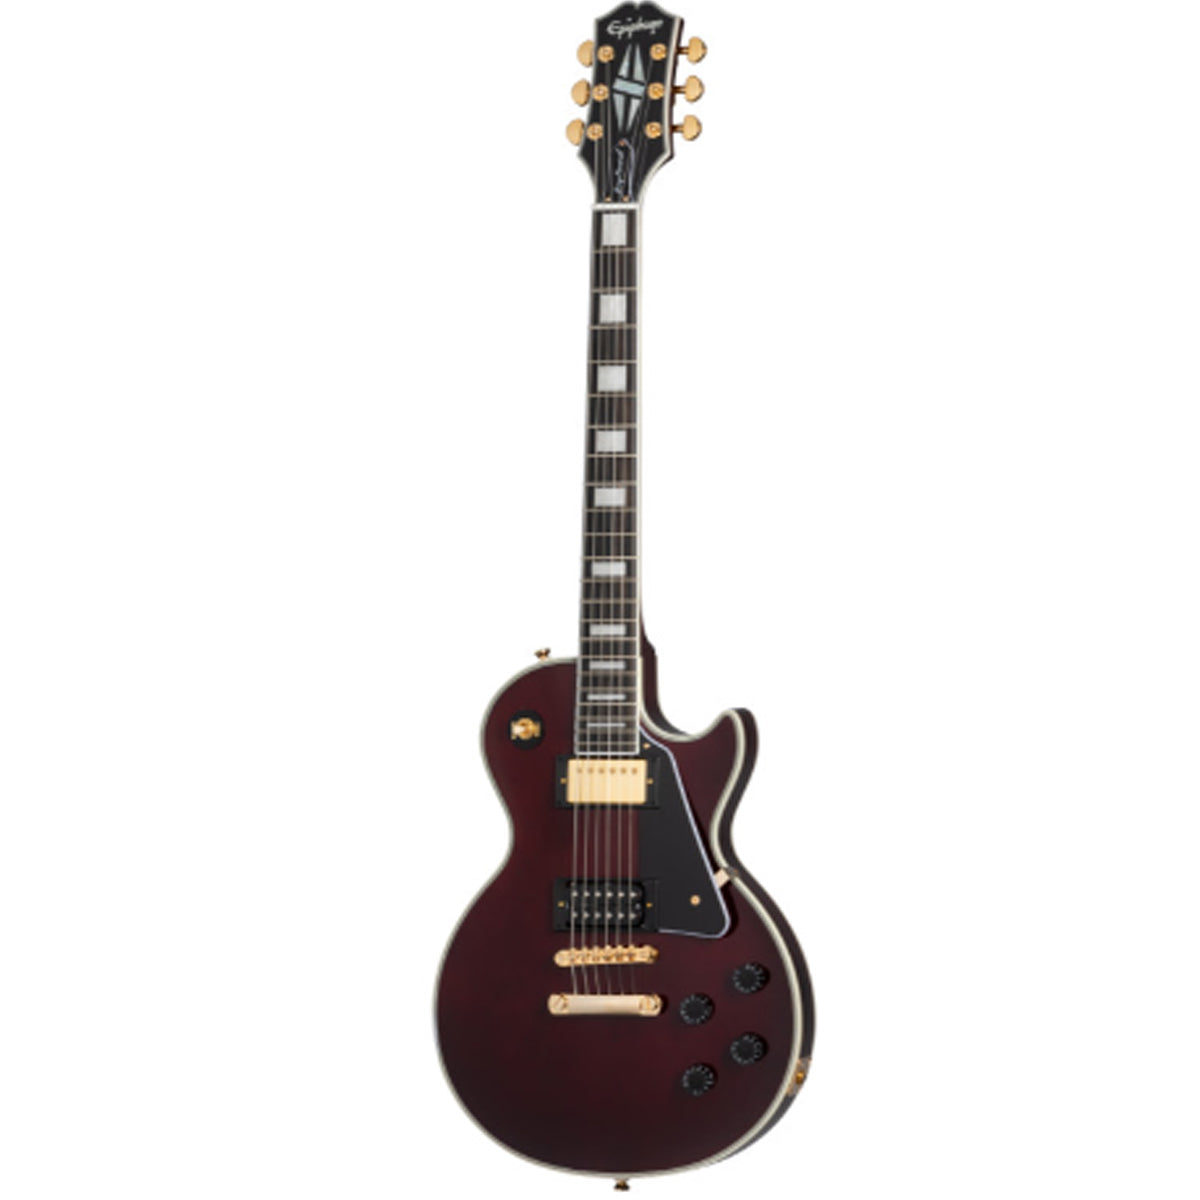 Epiphone Jerry Cantrell Signature Les Paul Wino Electric Guitar Wine Red w/ Hardcase